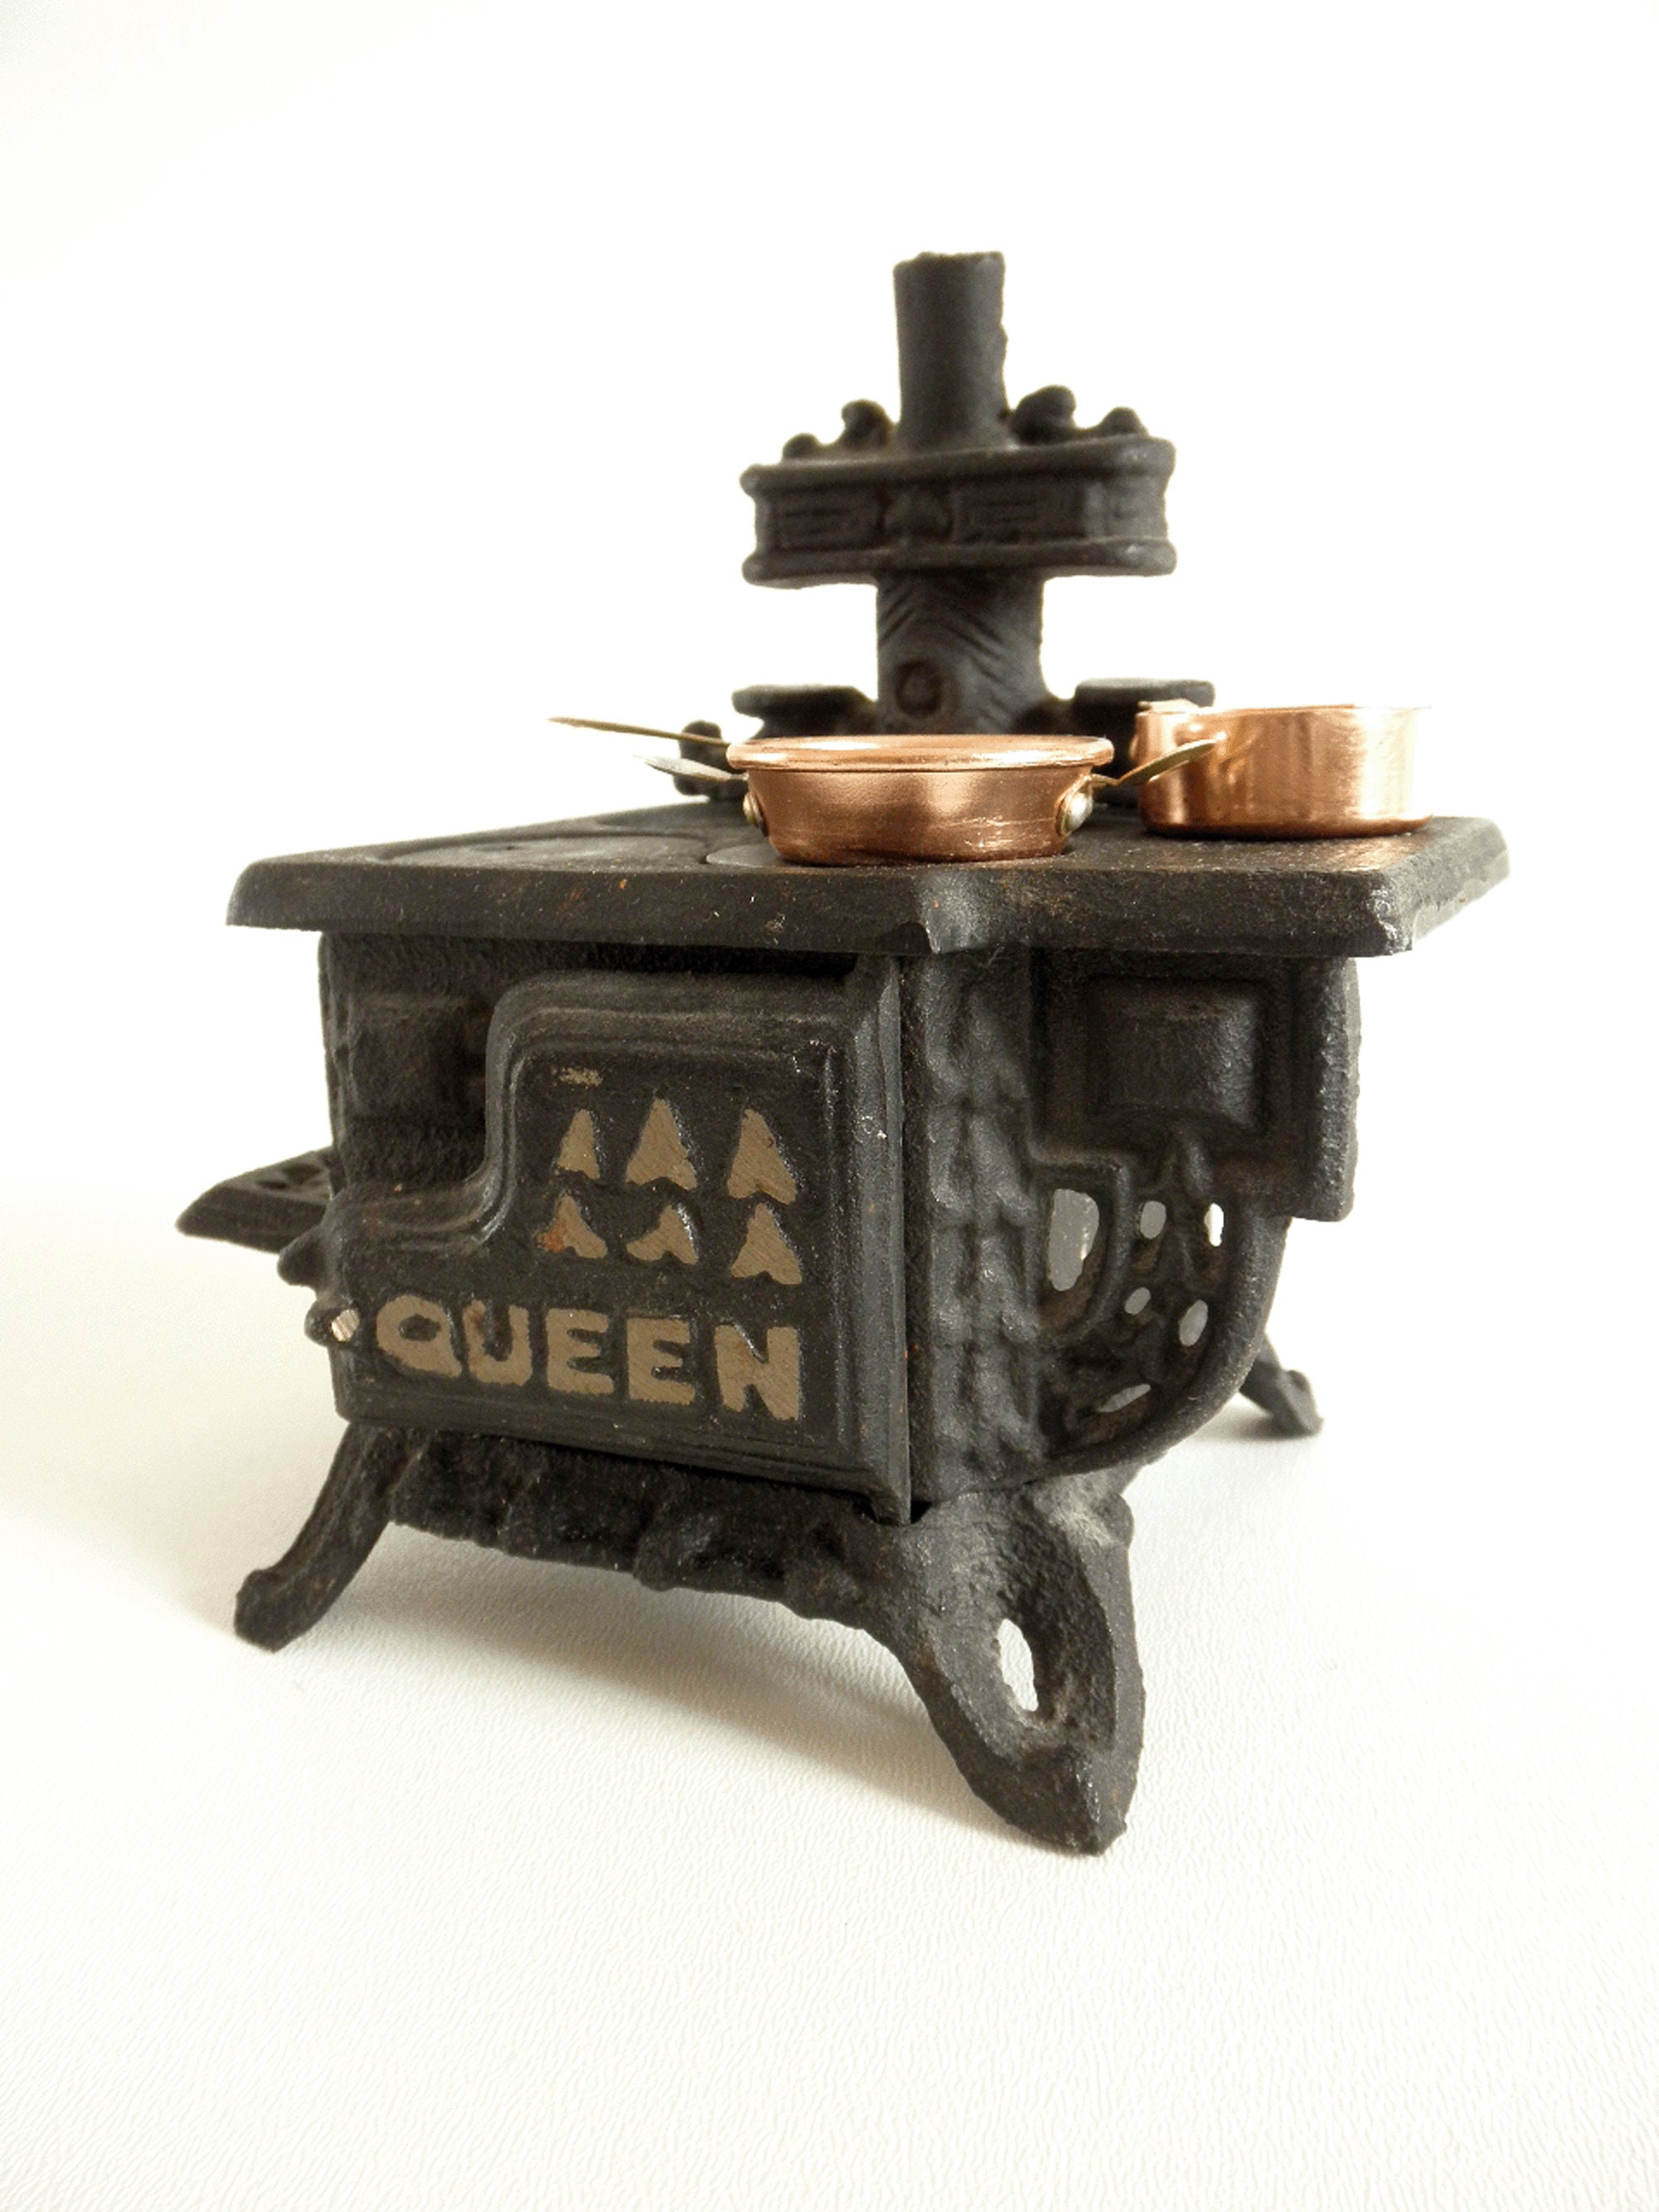 Sold at Auction: QUEEN MINIATURE CAST IRON STOVE W PANS